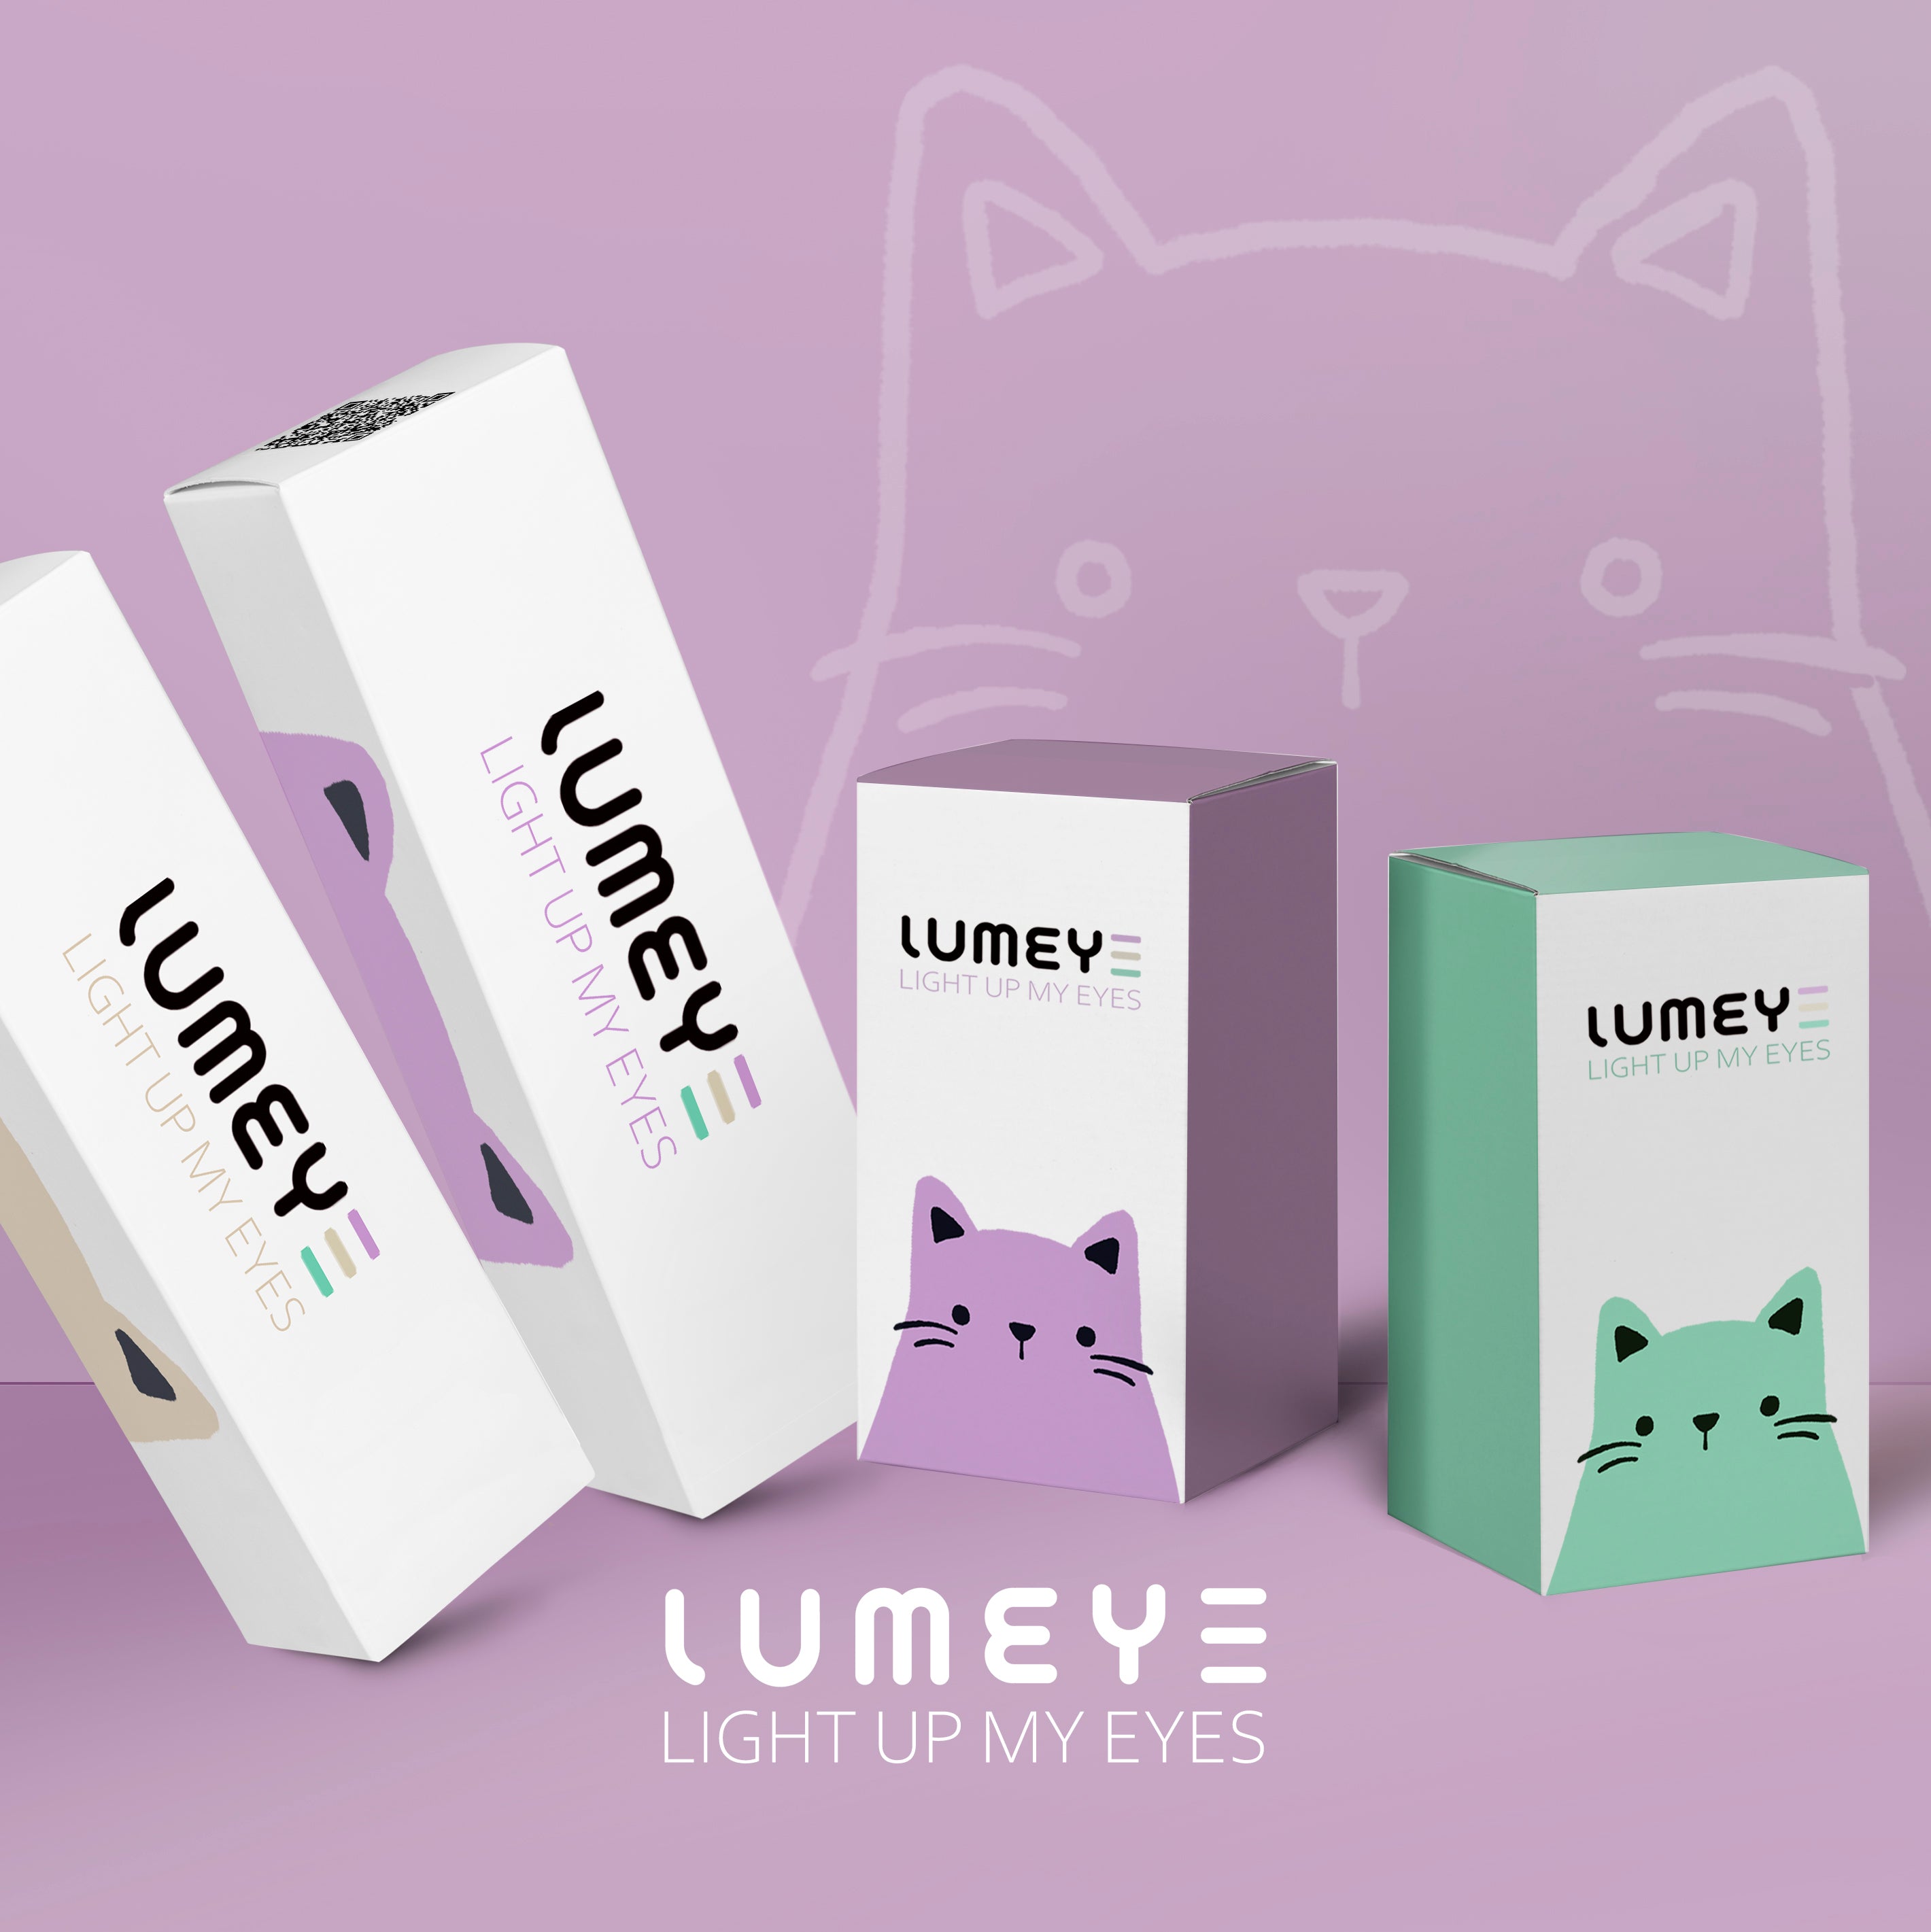 Best COLORED CONTACTS - LUMEYE Neon Light Colored Contact Lenses - LUMEYE